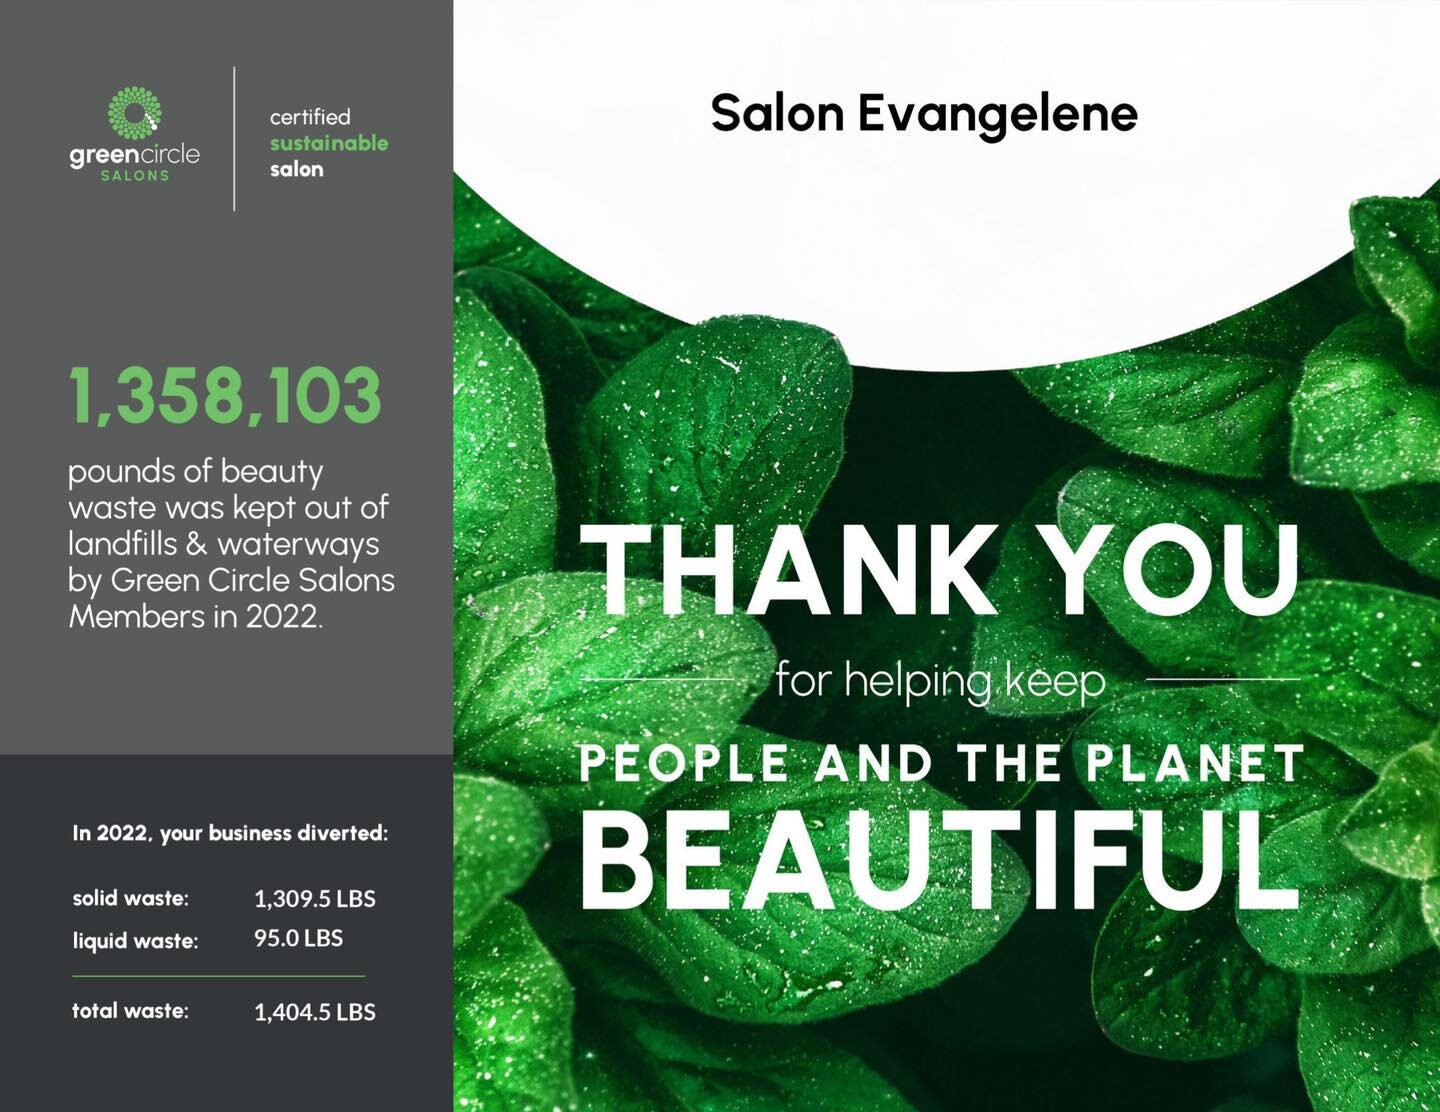 Happy EARTH 🌎 DAY! 
💚 We are so proud to be the ONLY @greencirclesalons certified salon in Medina County, OH. We diverted over 1400 lbs of beauty waste from going to a landfill in 2022! As a Salon E client, you help us contribute to the solution, i